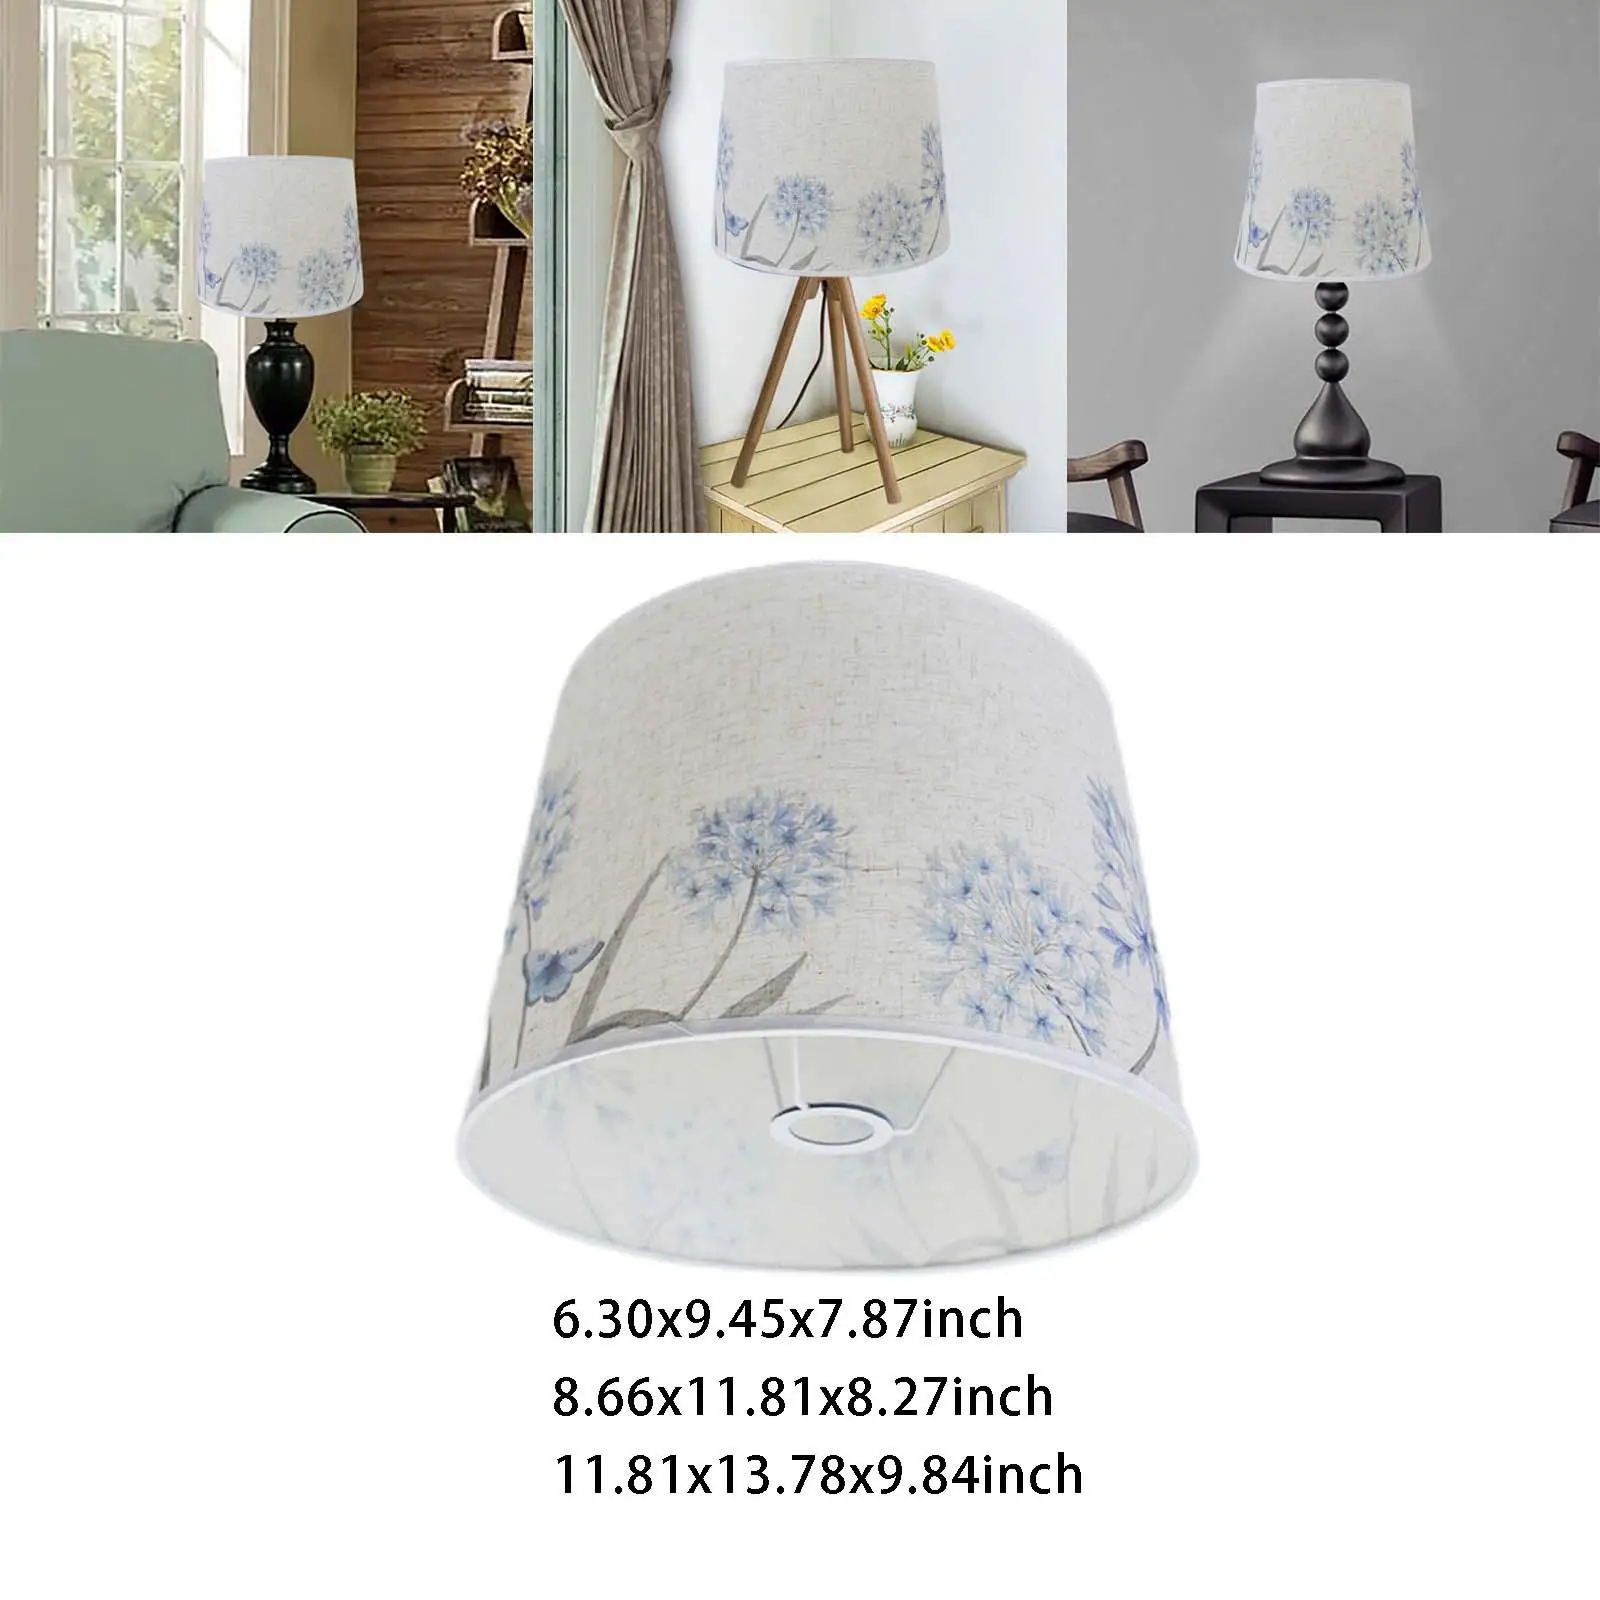 Rustic Style Simple Table Lamp Shade  Bouffant Lampshade  Fixtures Cover Removable Dustproof for Bedroom Office